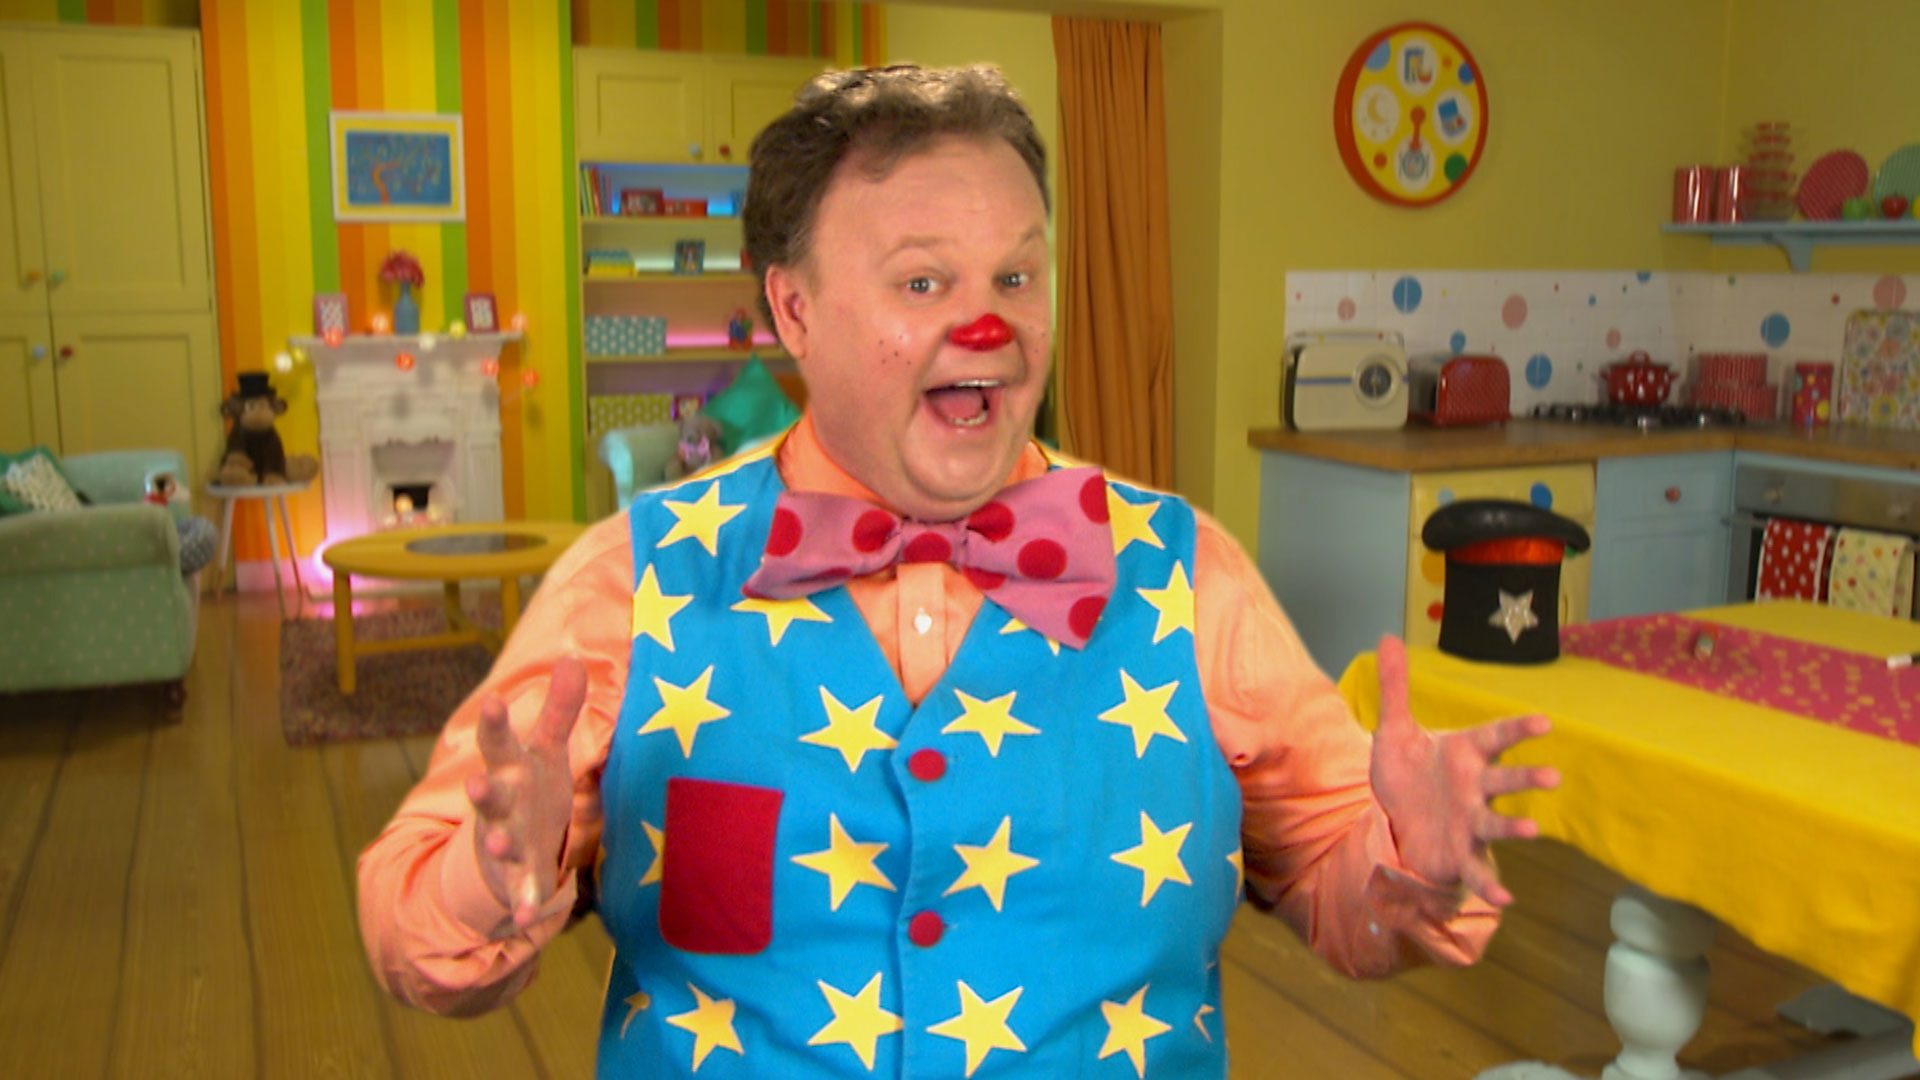 BBC iPlayer - At Home with Mr Tumble - Series 1: 8. Funny Faces